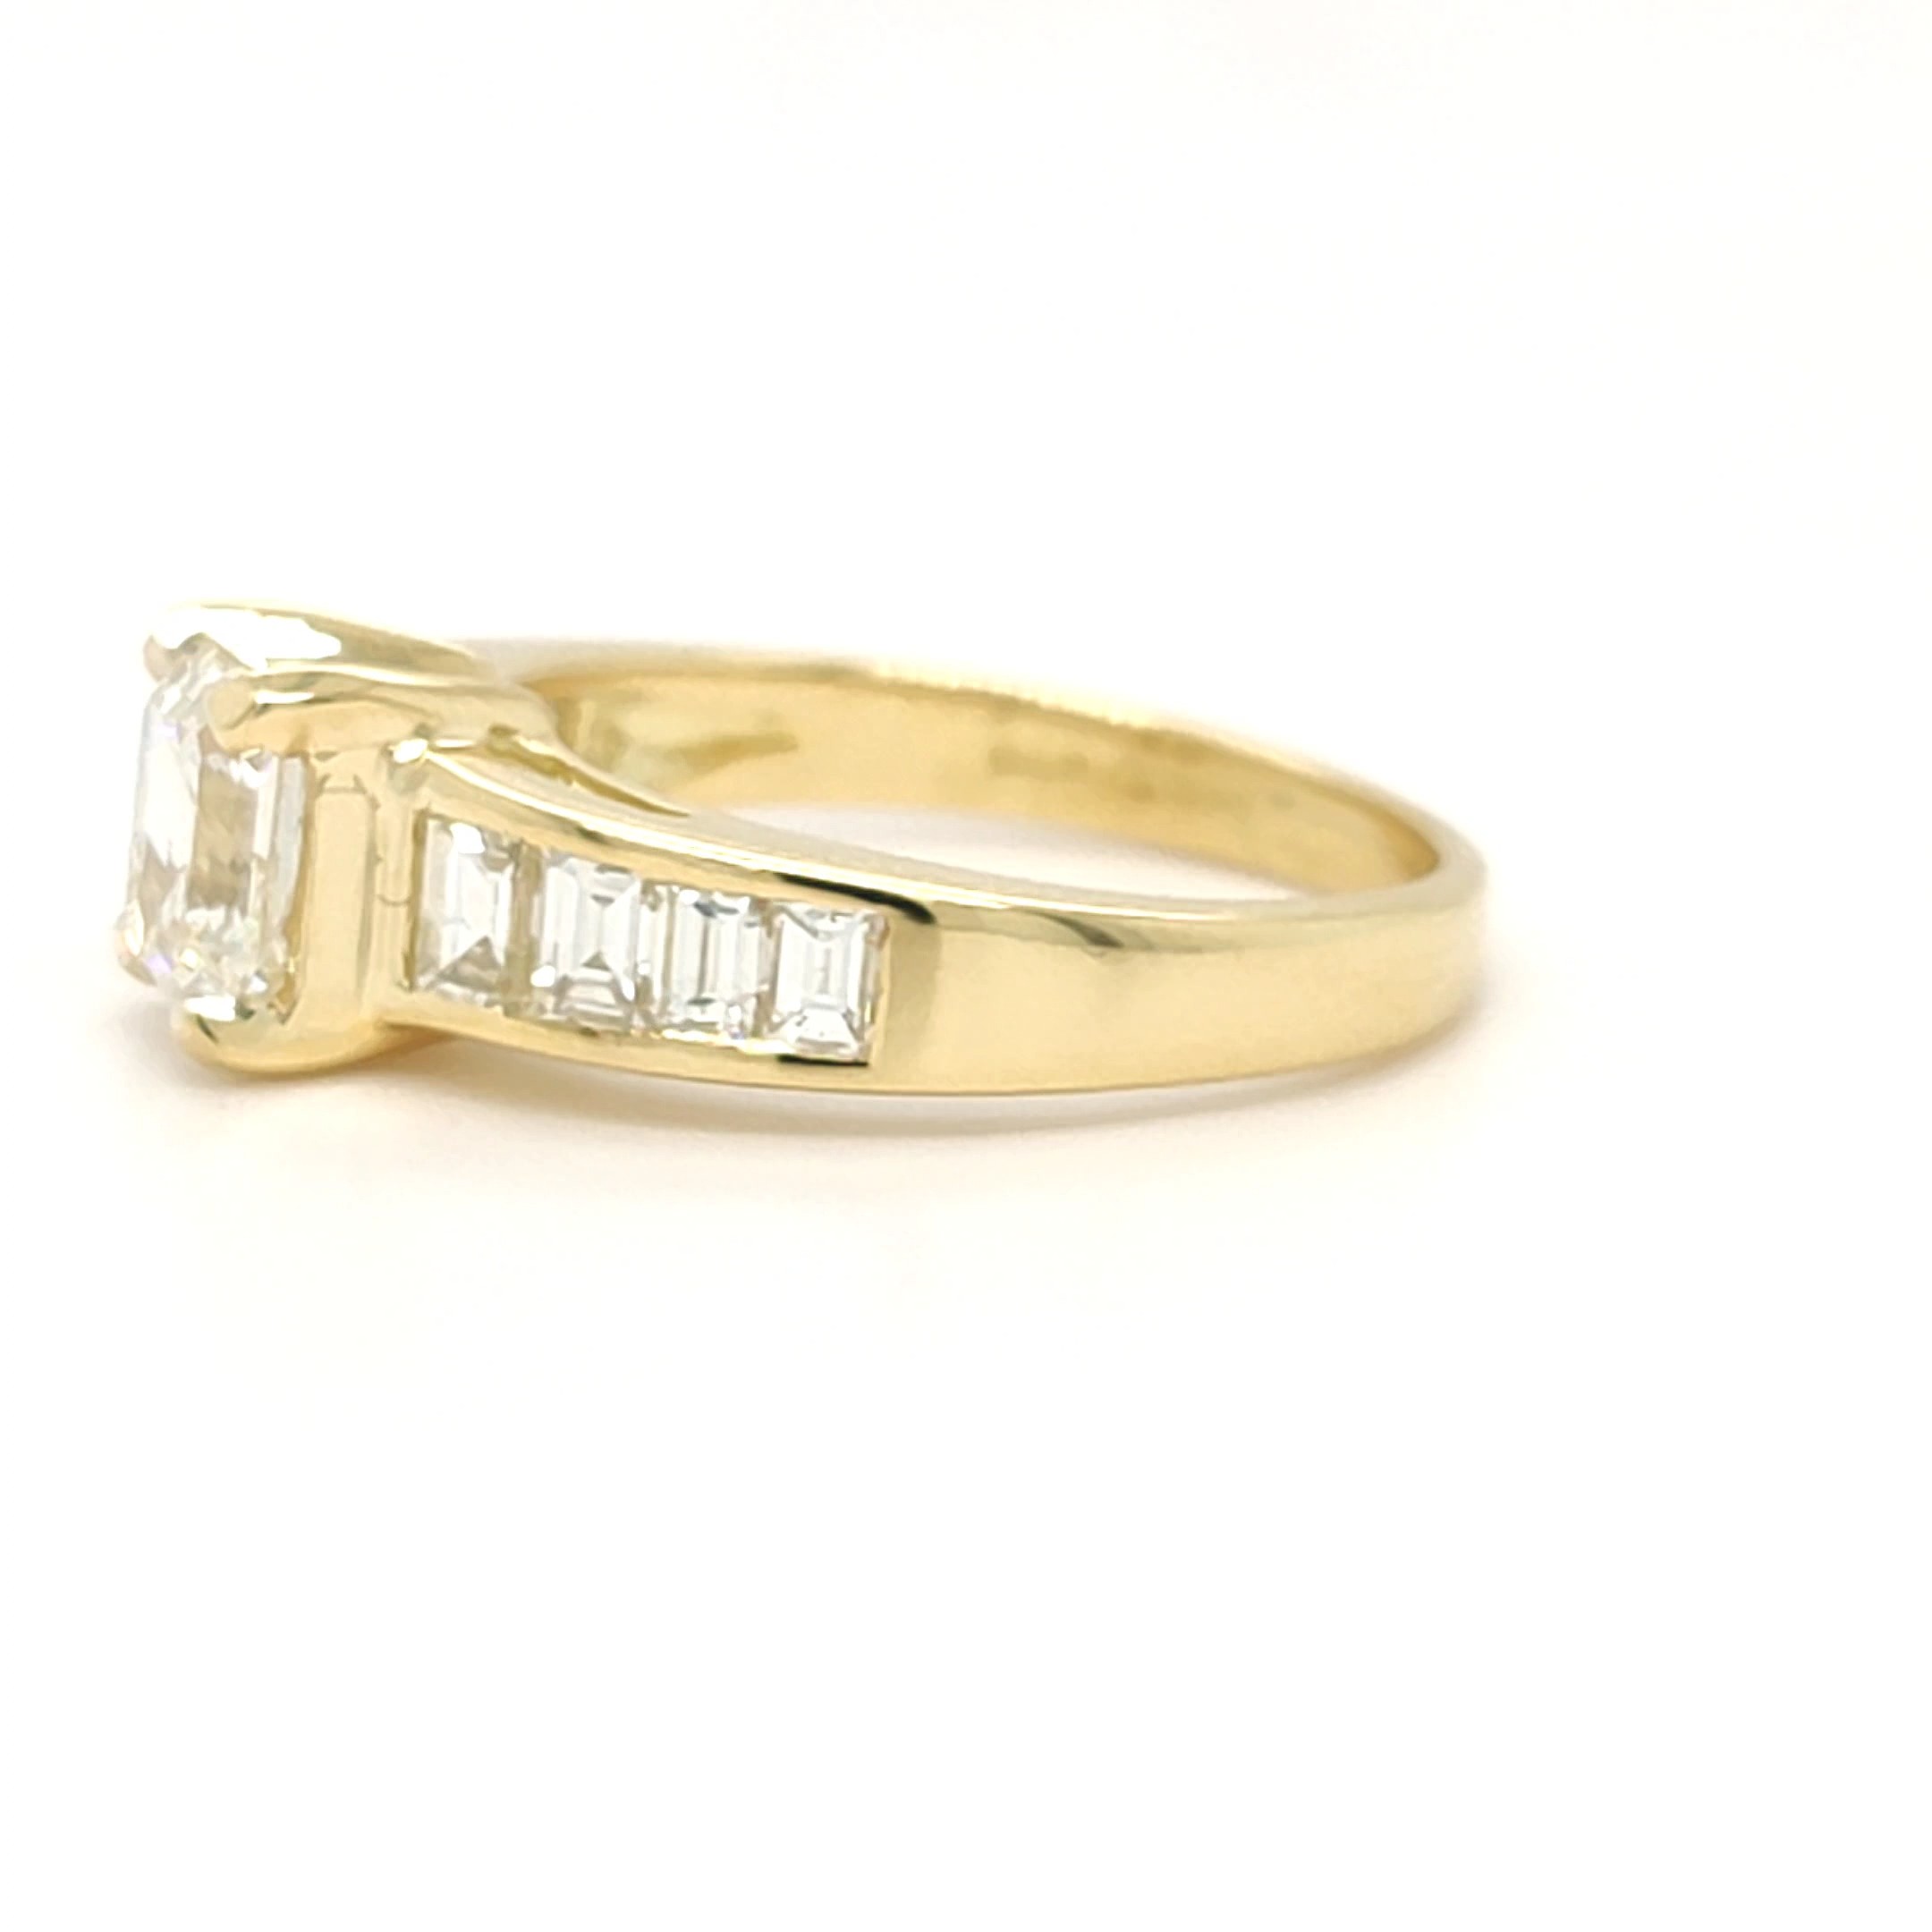 1.74ct, 18ct Yellow Gold Emerald cut and Baguette Cut Diamond Ring